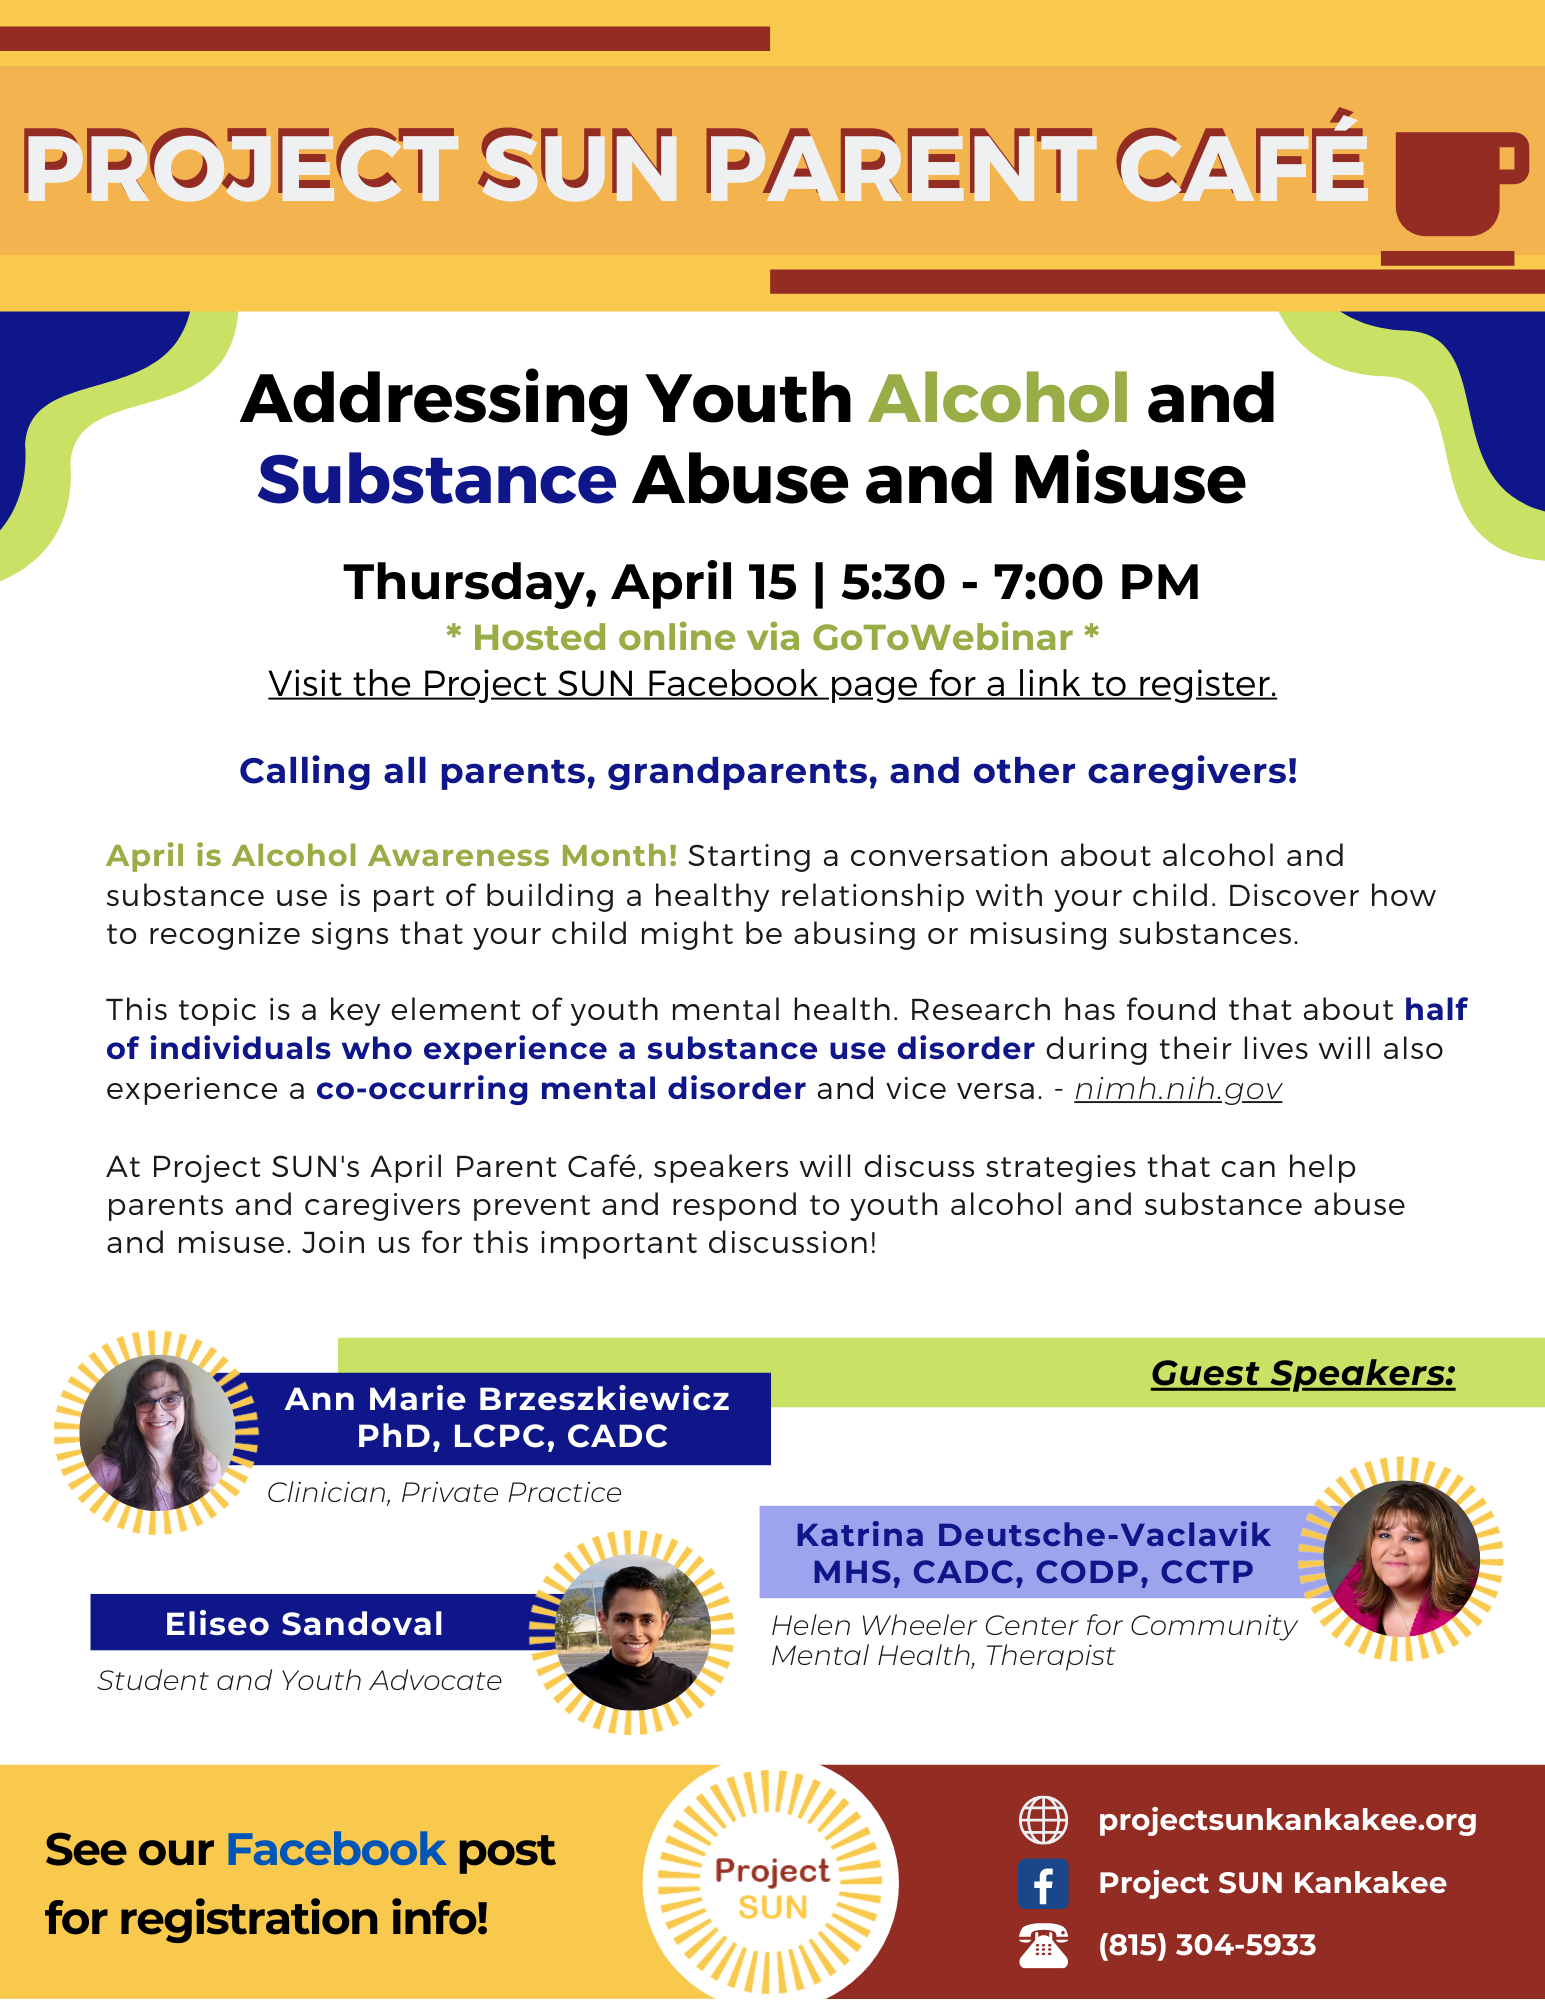 Parent Cafe: Addressing Youth Alcohol and Substance Abuse and Misuse